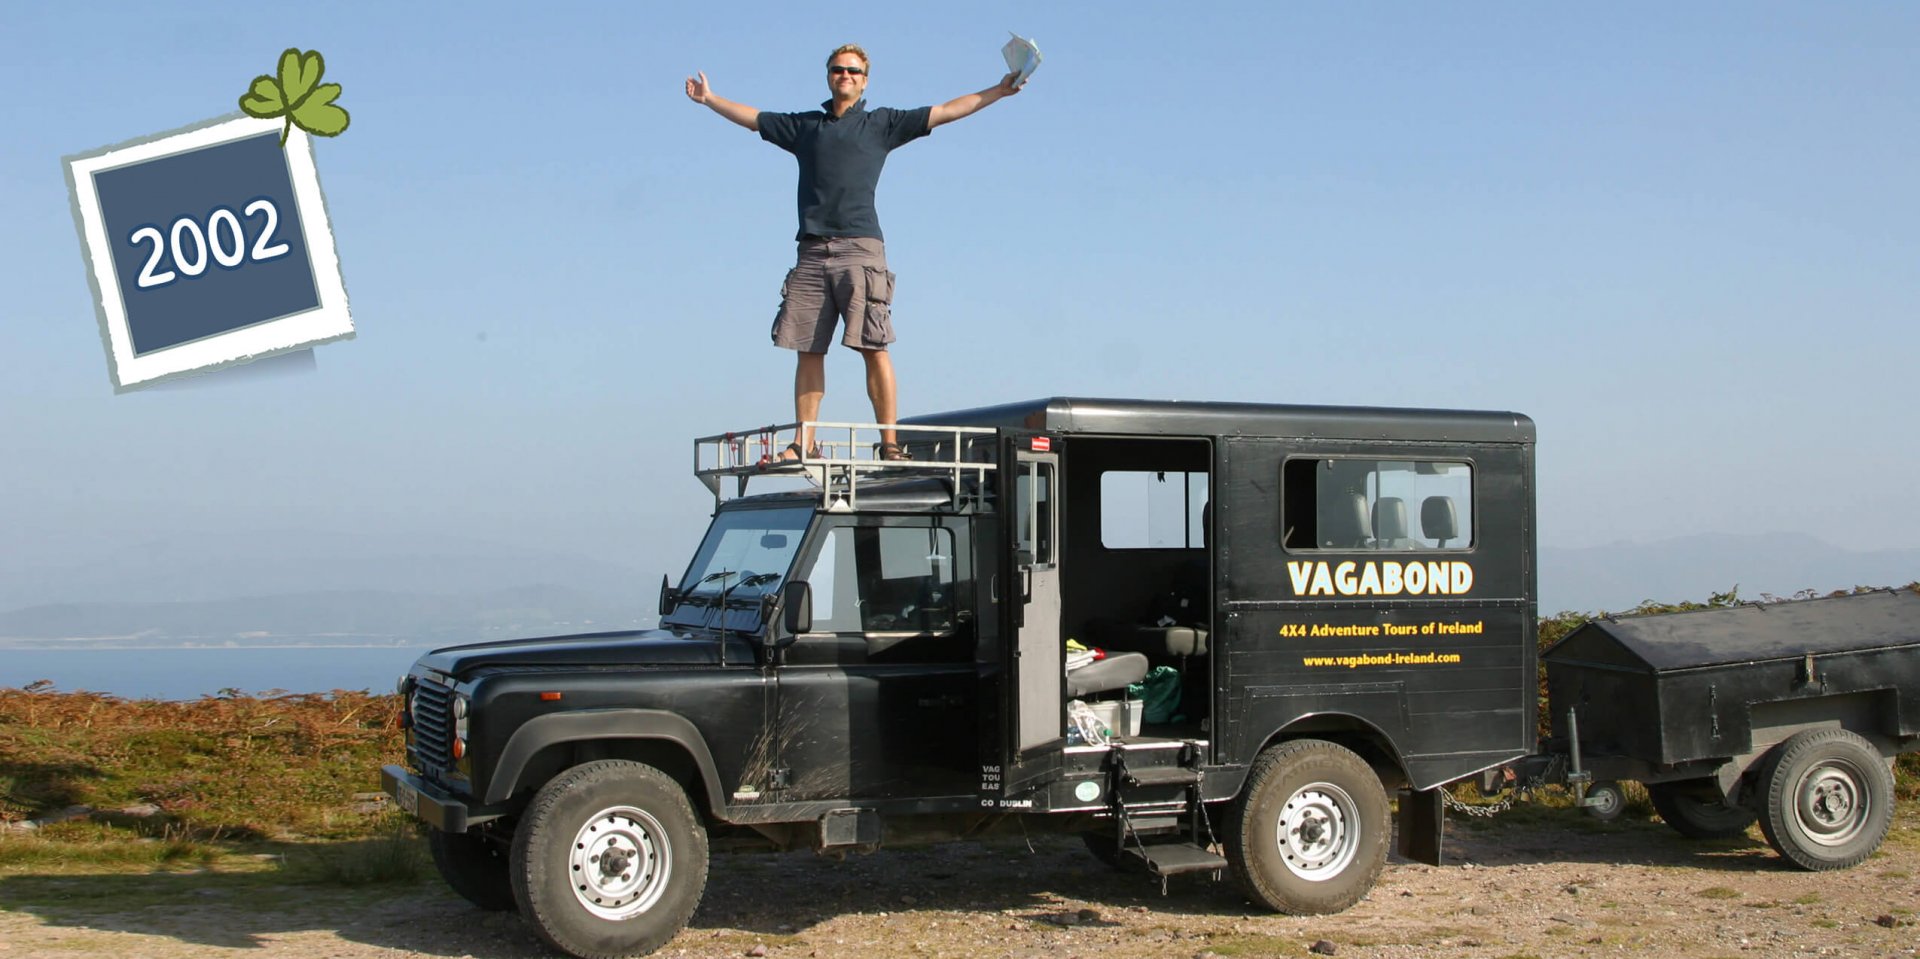 Rob on an original Land Rover Defender VagaTron tour vehicle in Ireland in 2002